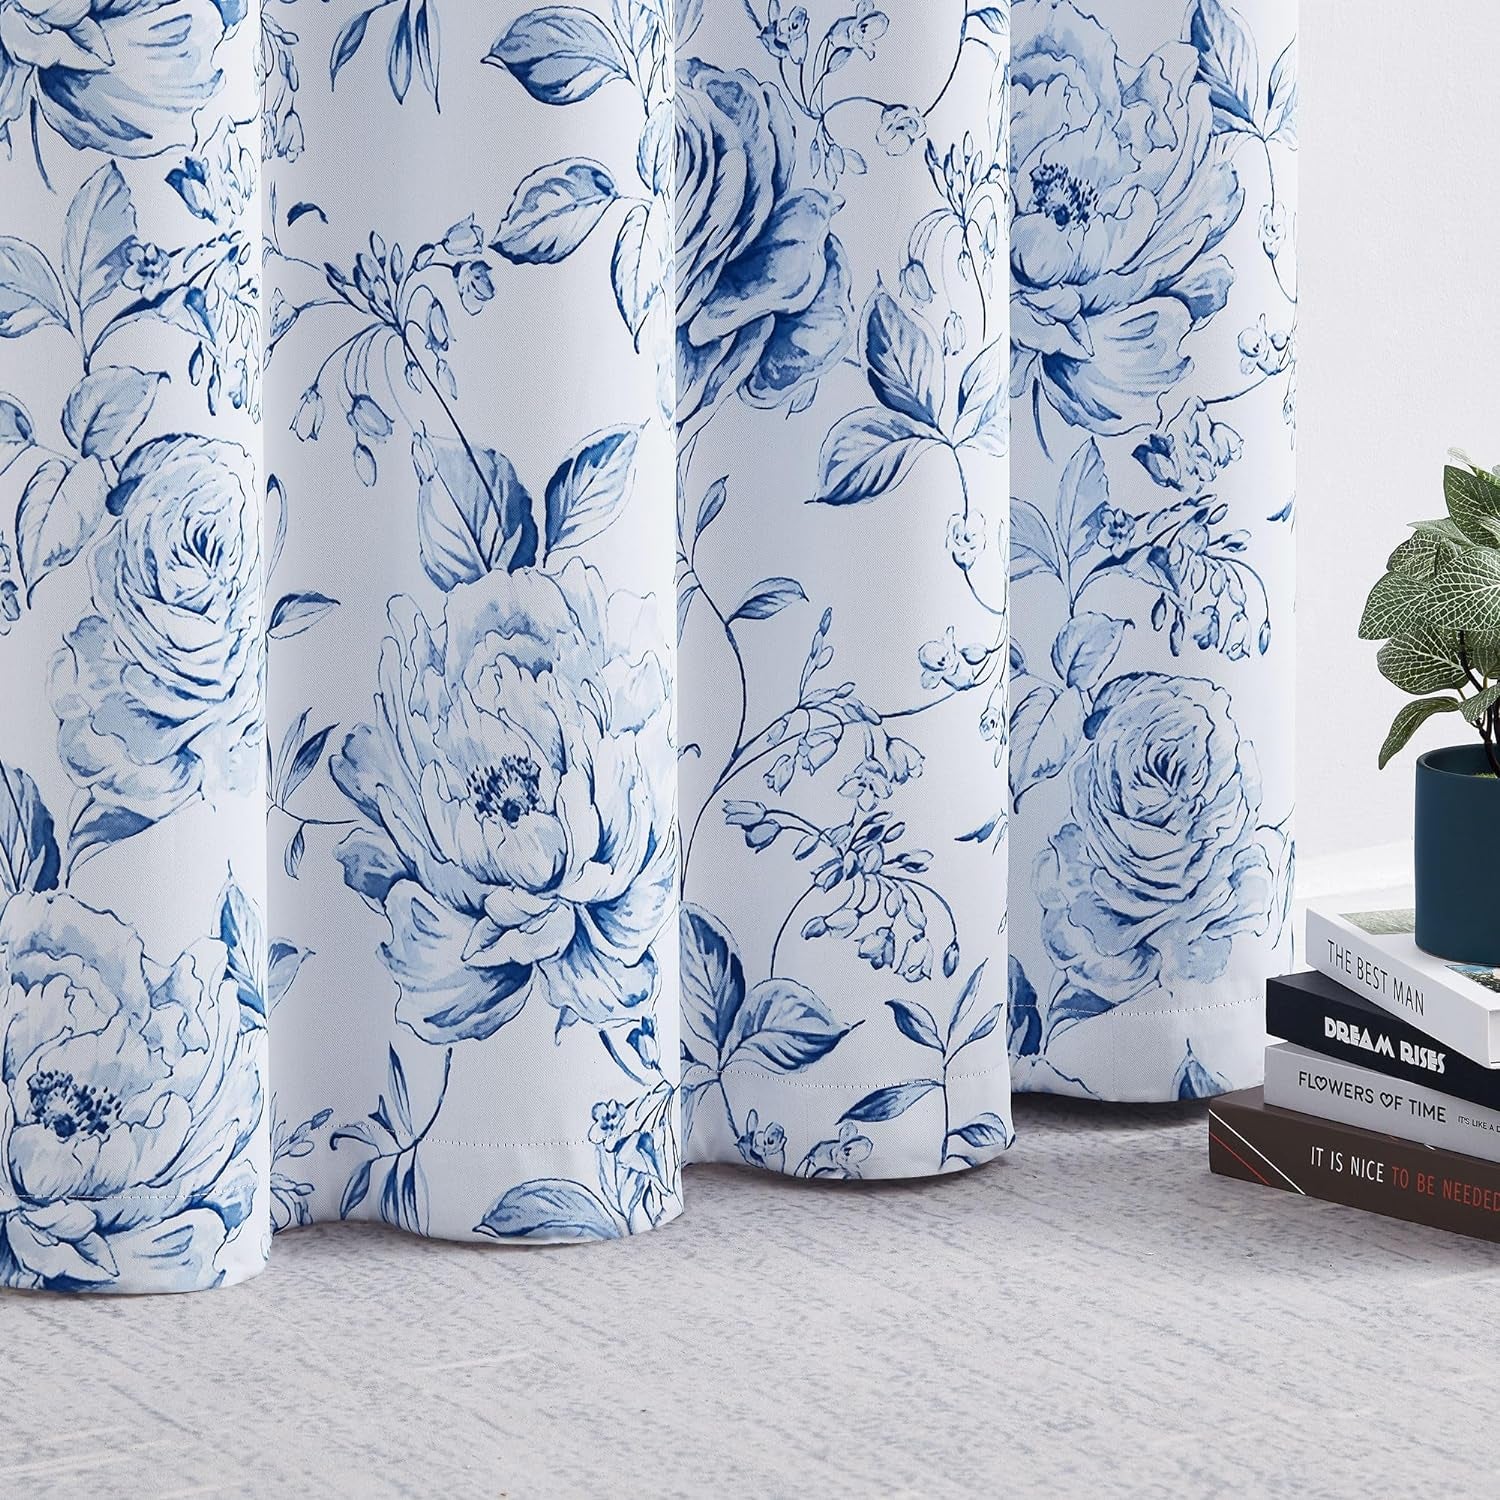 Beauoop Full Blackout Window Curtain Panels Floral Botanical Print Room Darkening Thermal Insulated Drapes Rose Grommet Window Treatment for Bedroom Theatre Office, 52 X 63 Inch, White/Blue, 2 Panels  Beauoop   